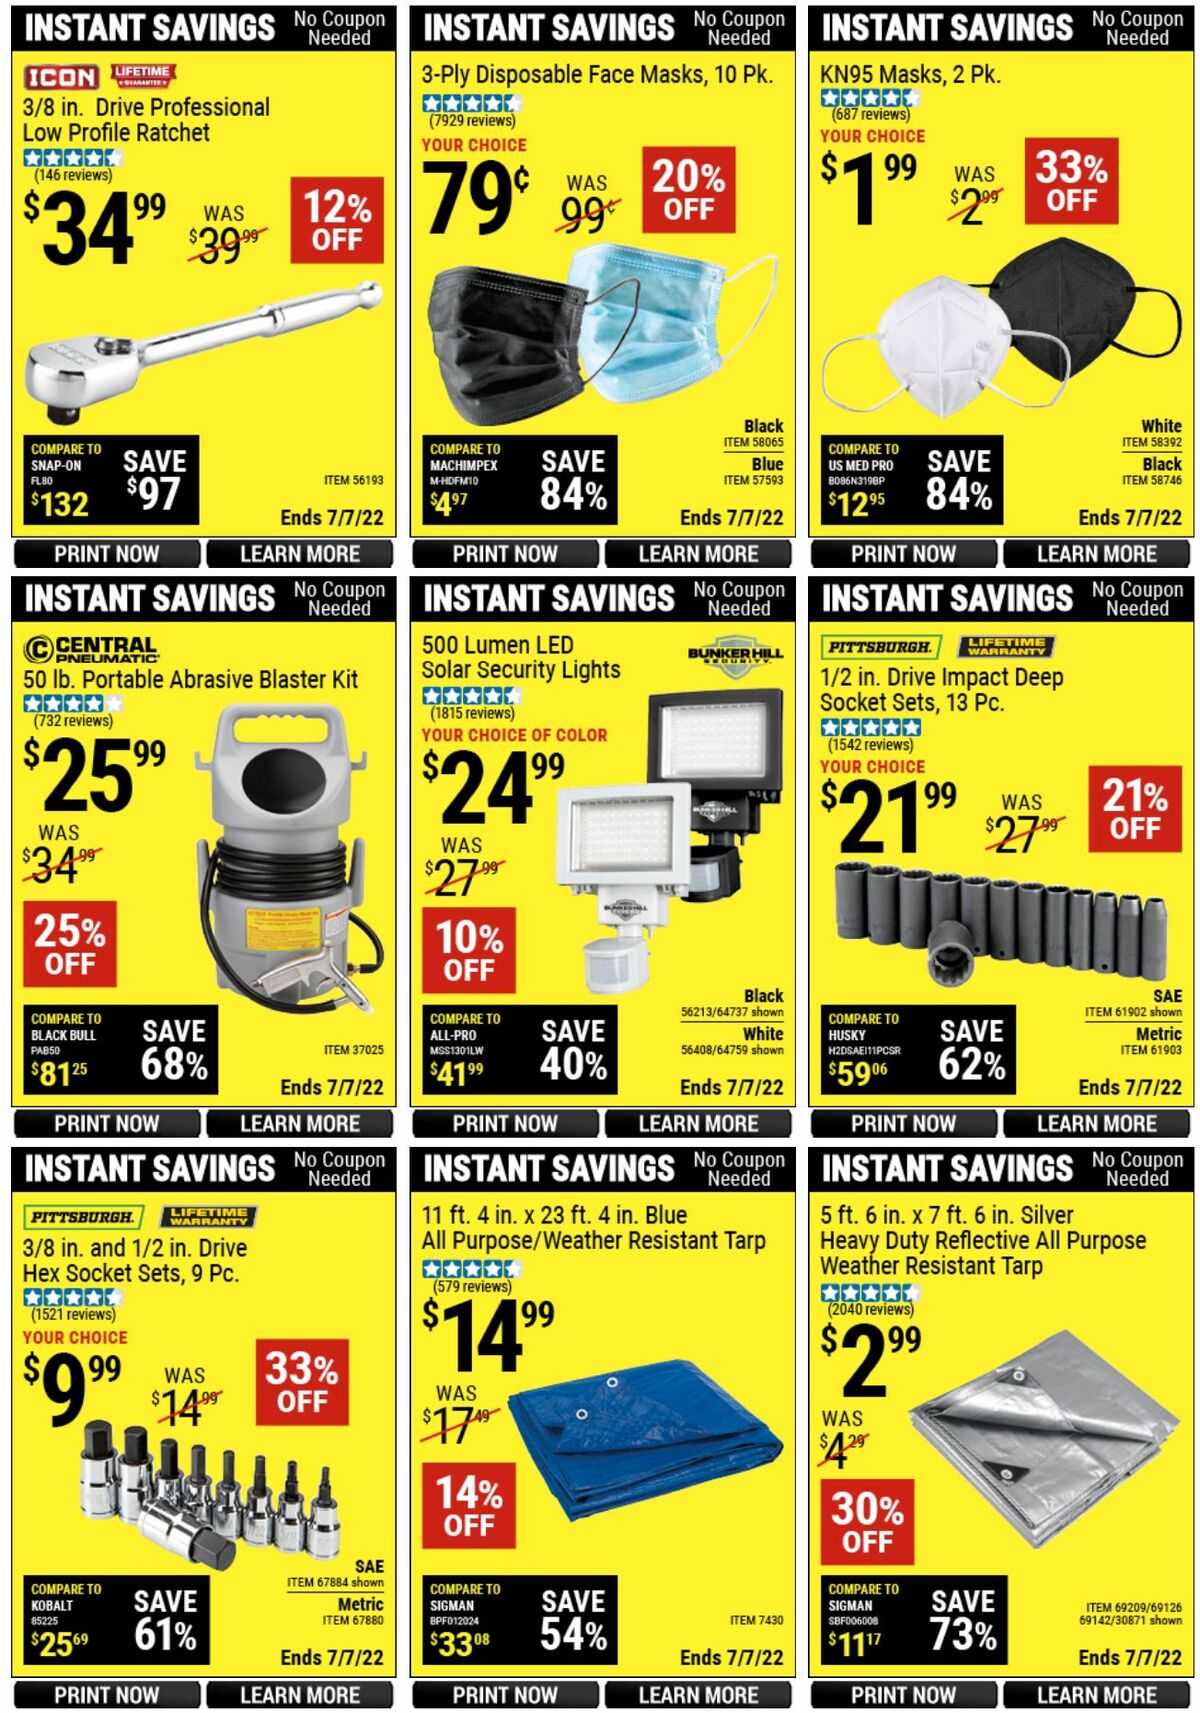 Harbor Freight Tools Instant Savings Weekly Ad from June 20